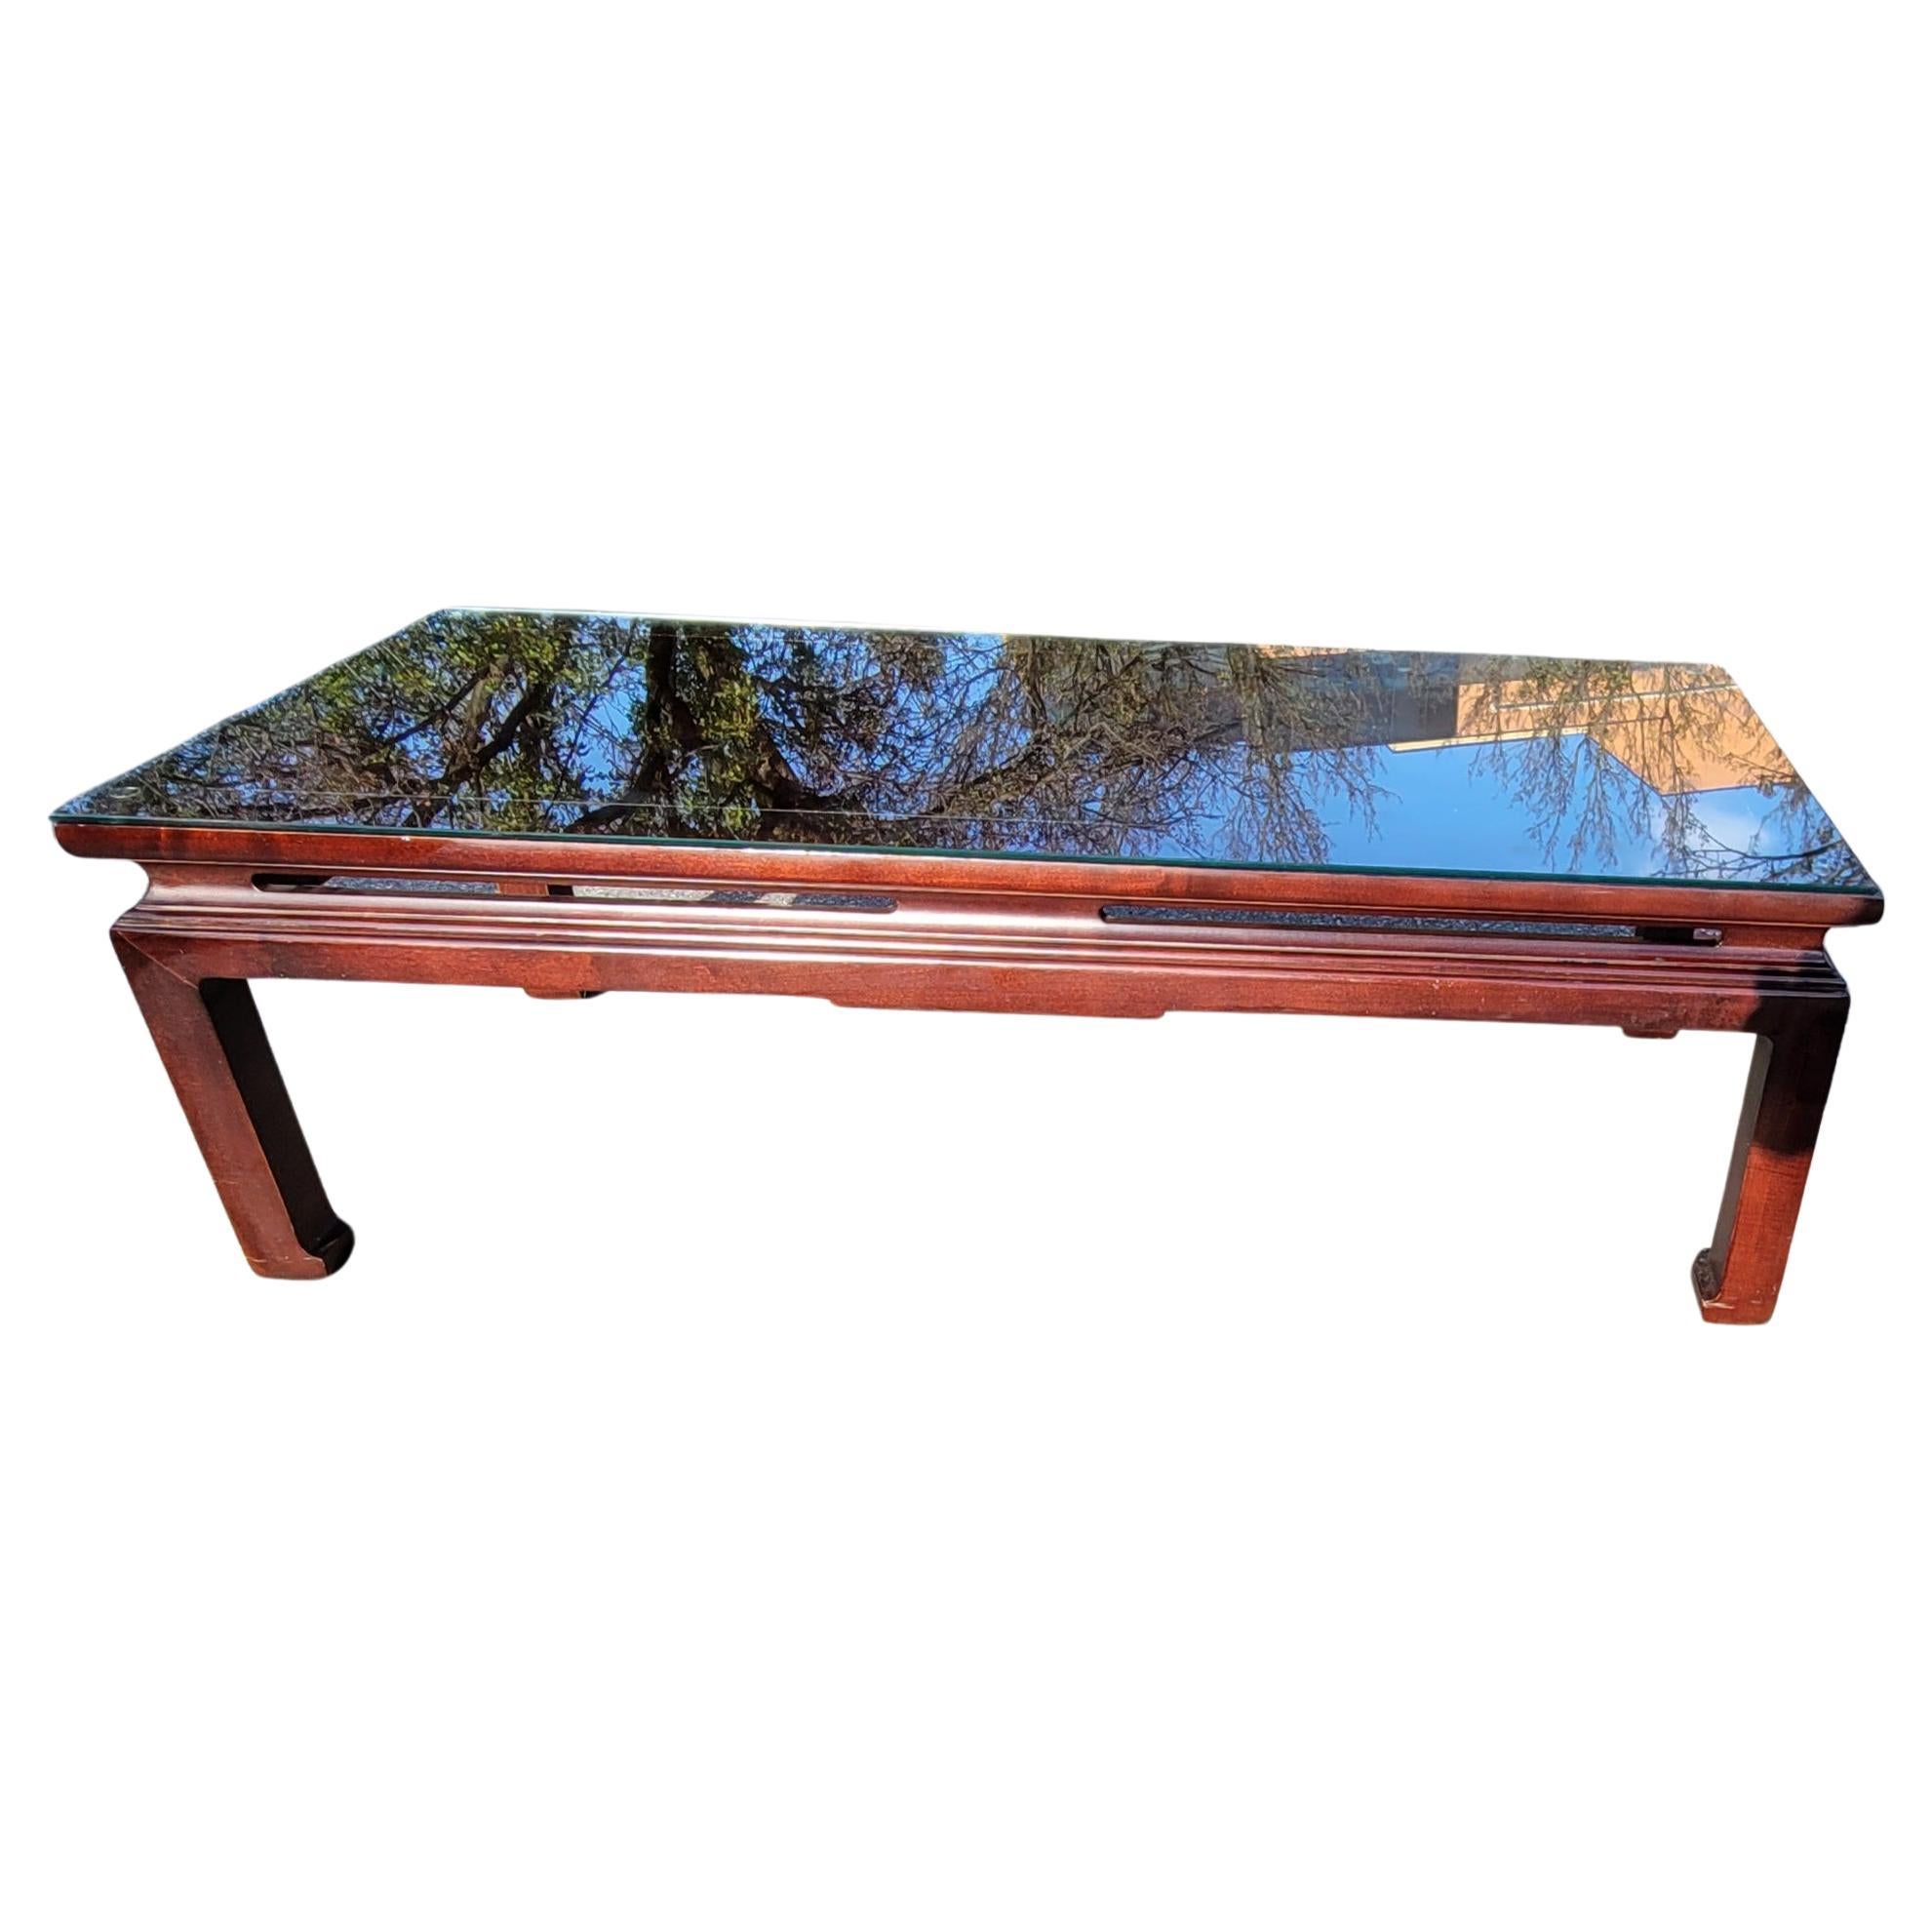 Baker Furniture Company Historic Charleston Reproductions Collection Asian Style Cocktail / Coffee Table with protective Glass Top. Good vintage condition. Proudly made in America. Measures 53